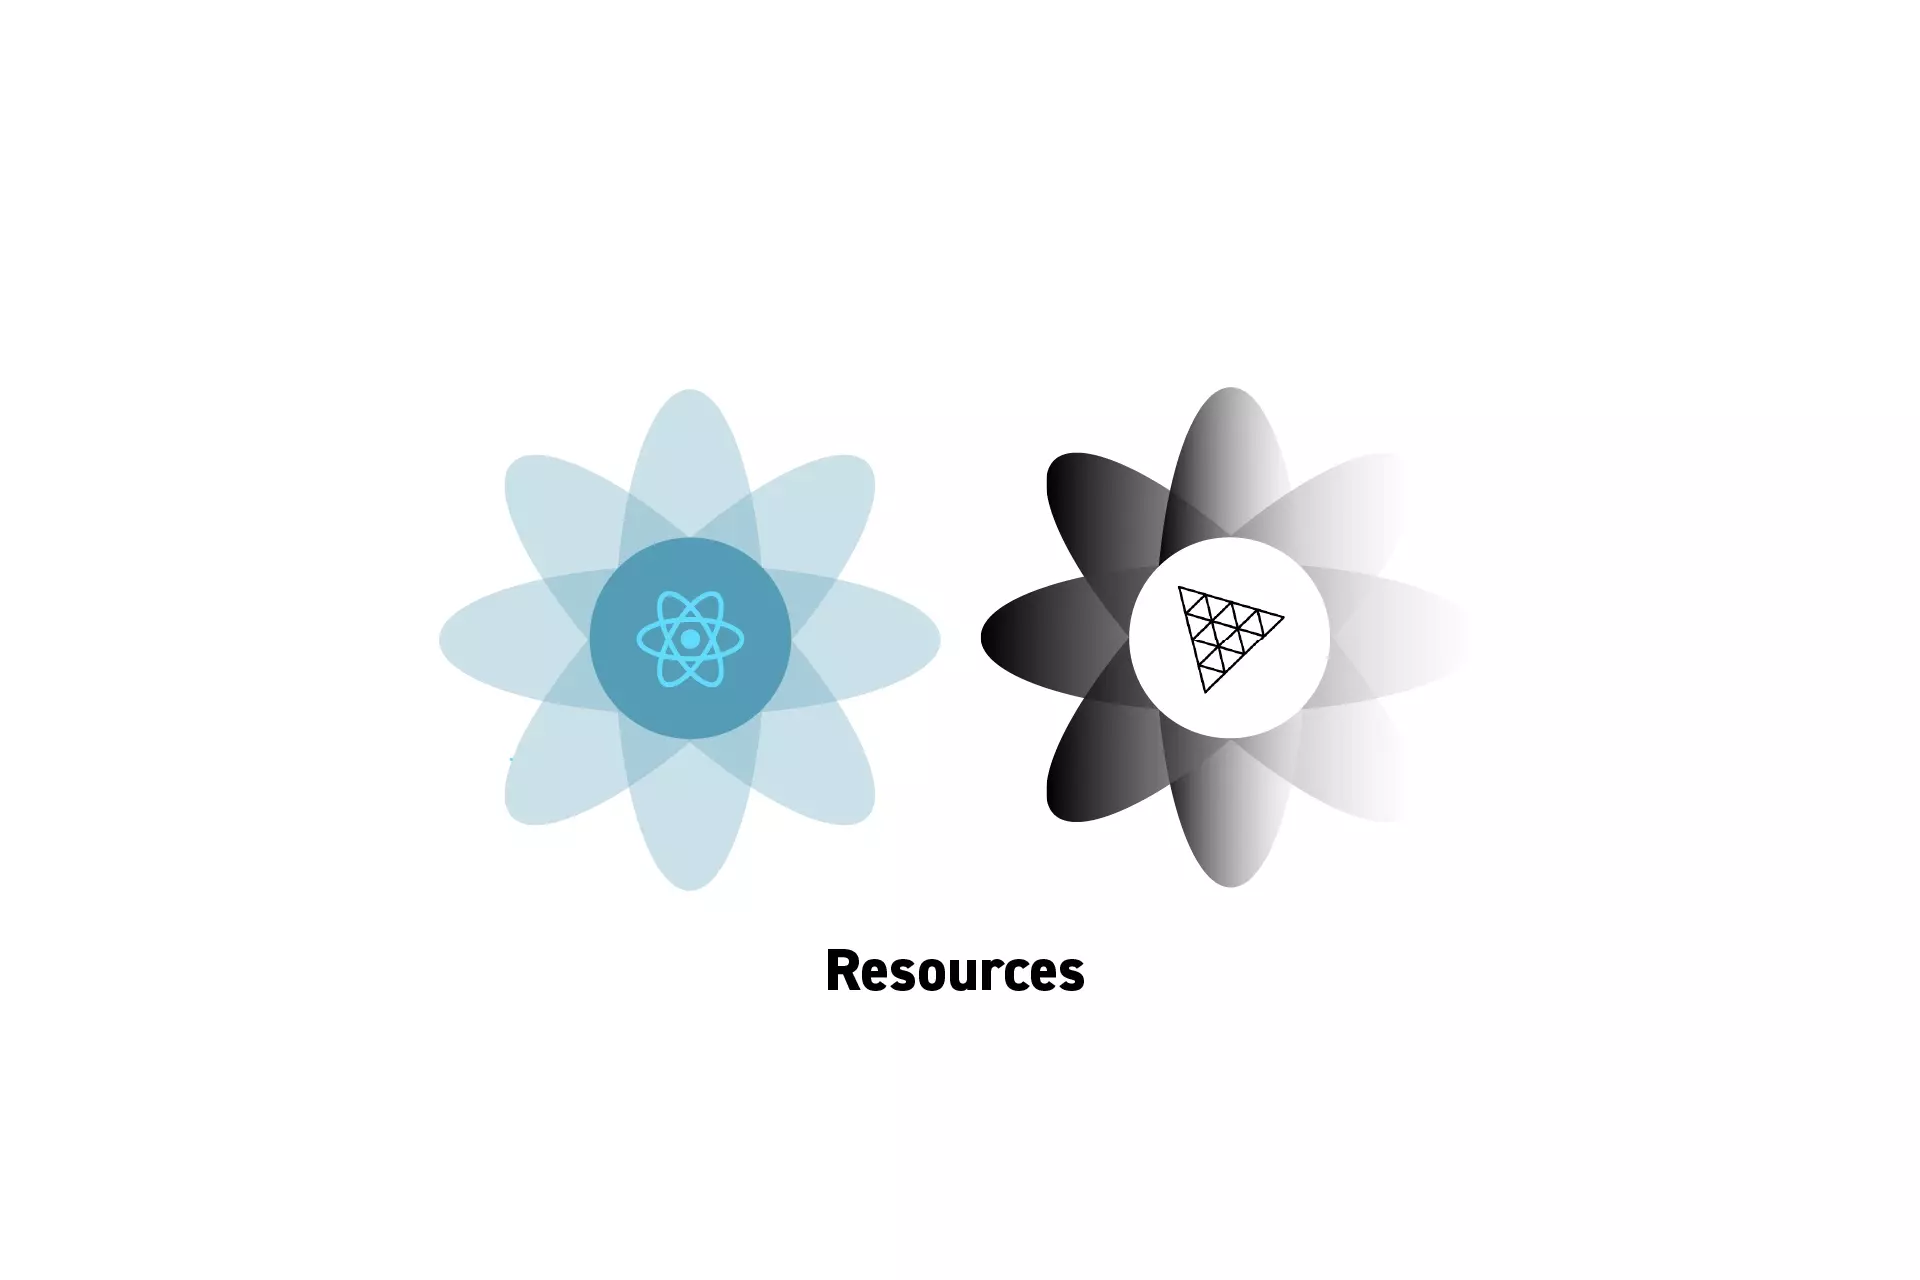 Two flowers that represent ReactJS &amp; ThreeJS with the text "Resources" beneath them.<br />